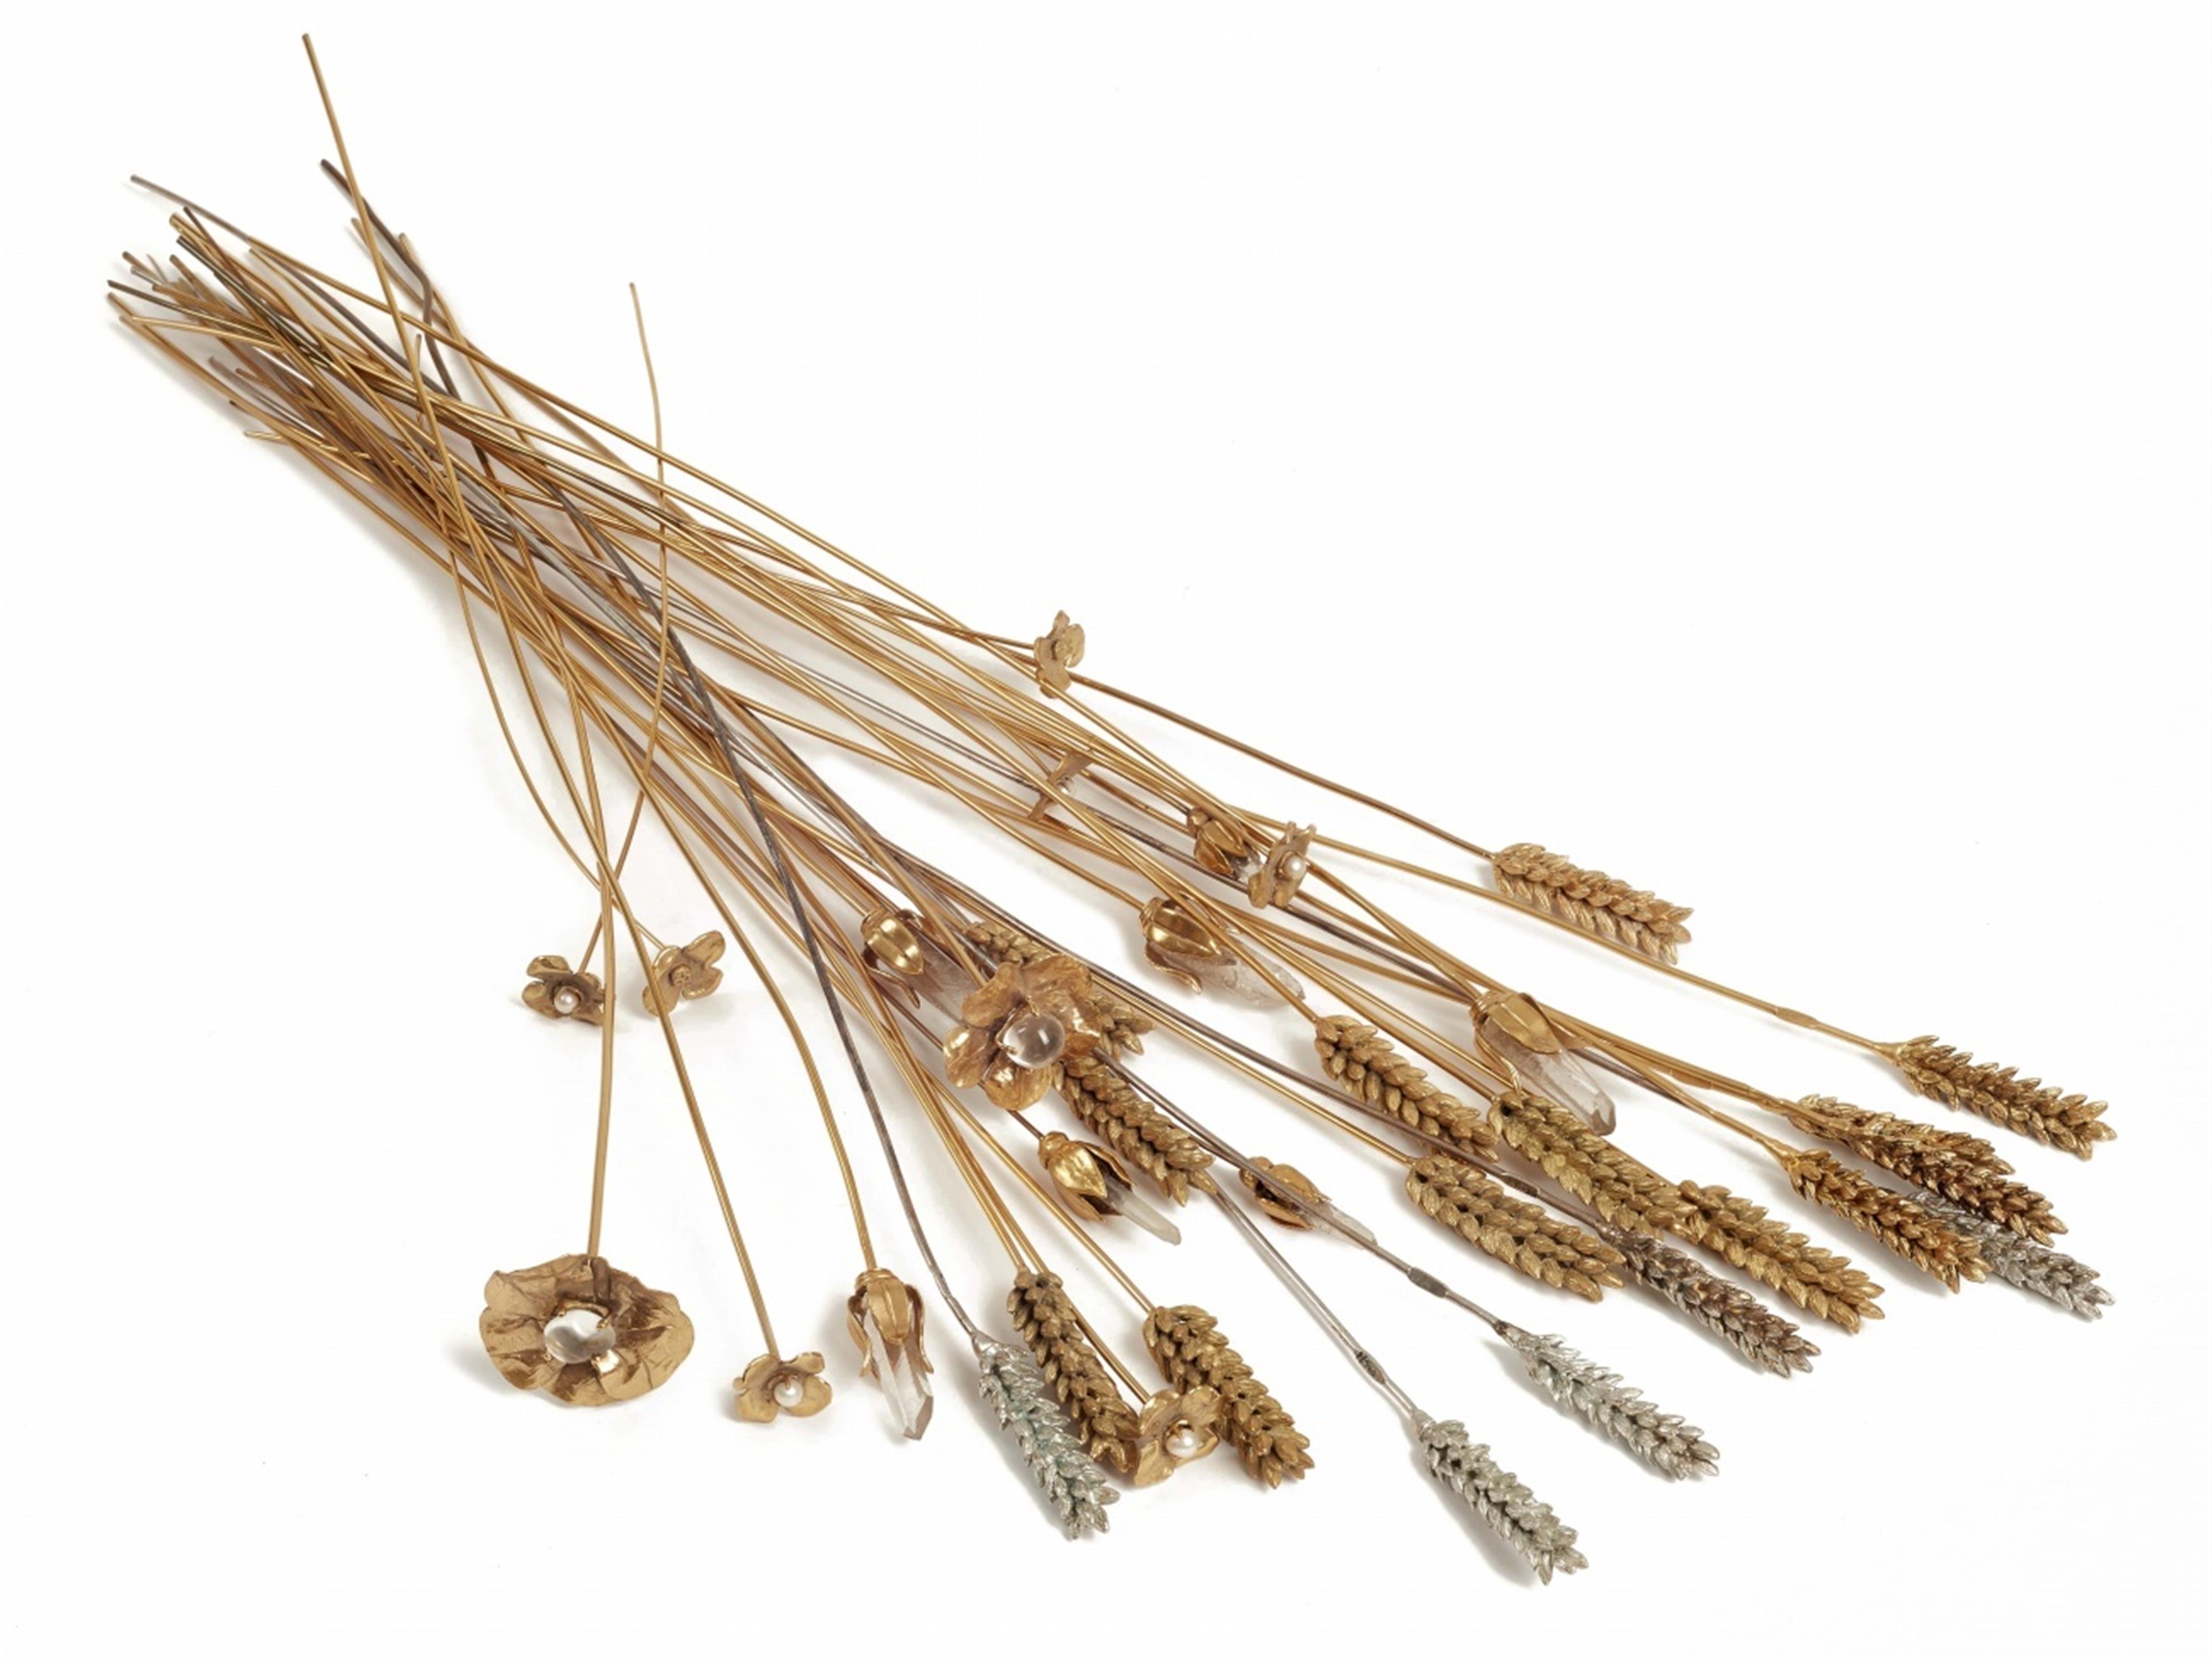 Eighteen gold ans silver plated metal ears of wheat, nine camellias and seven flowers - 